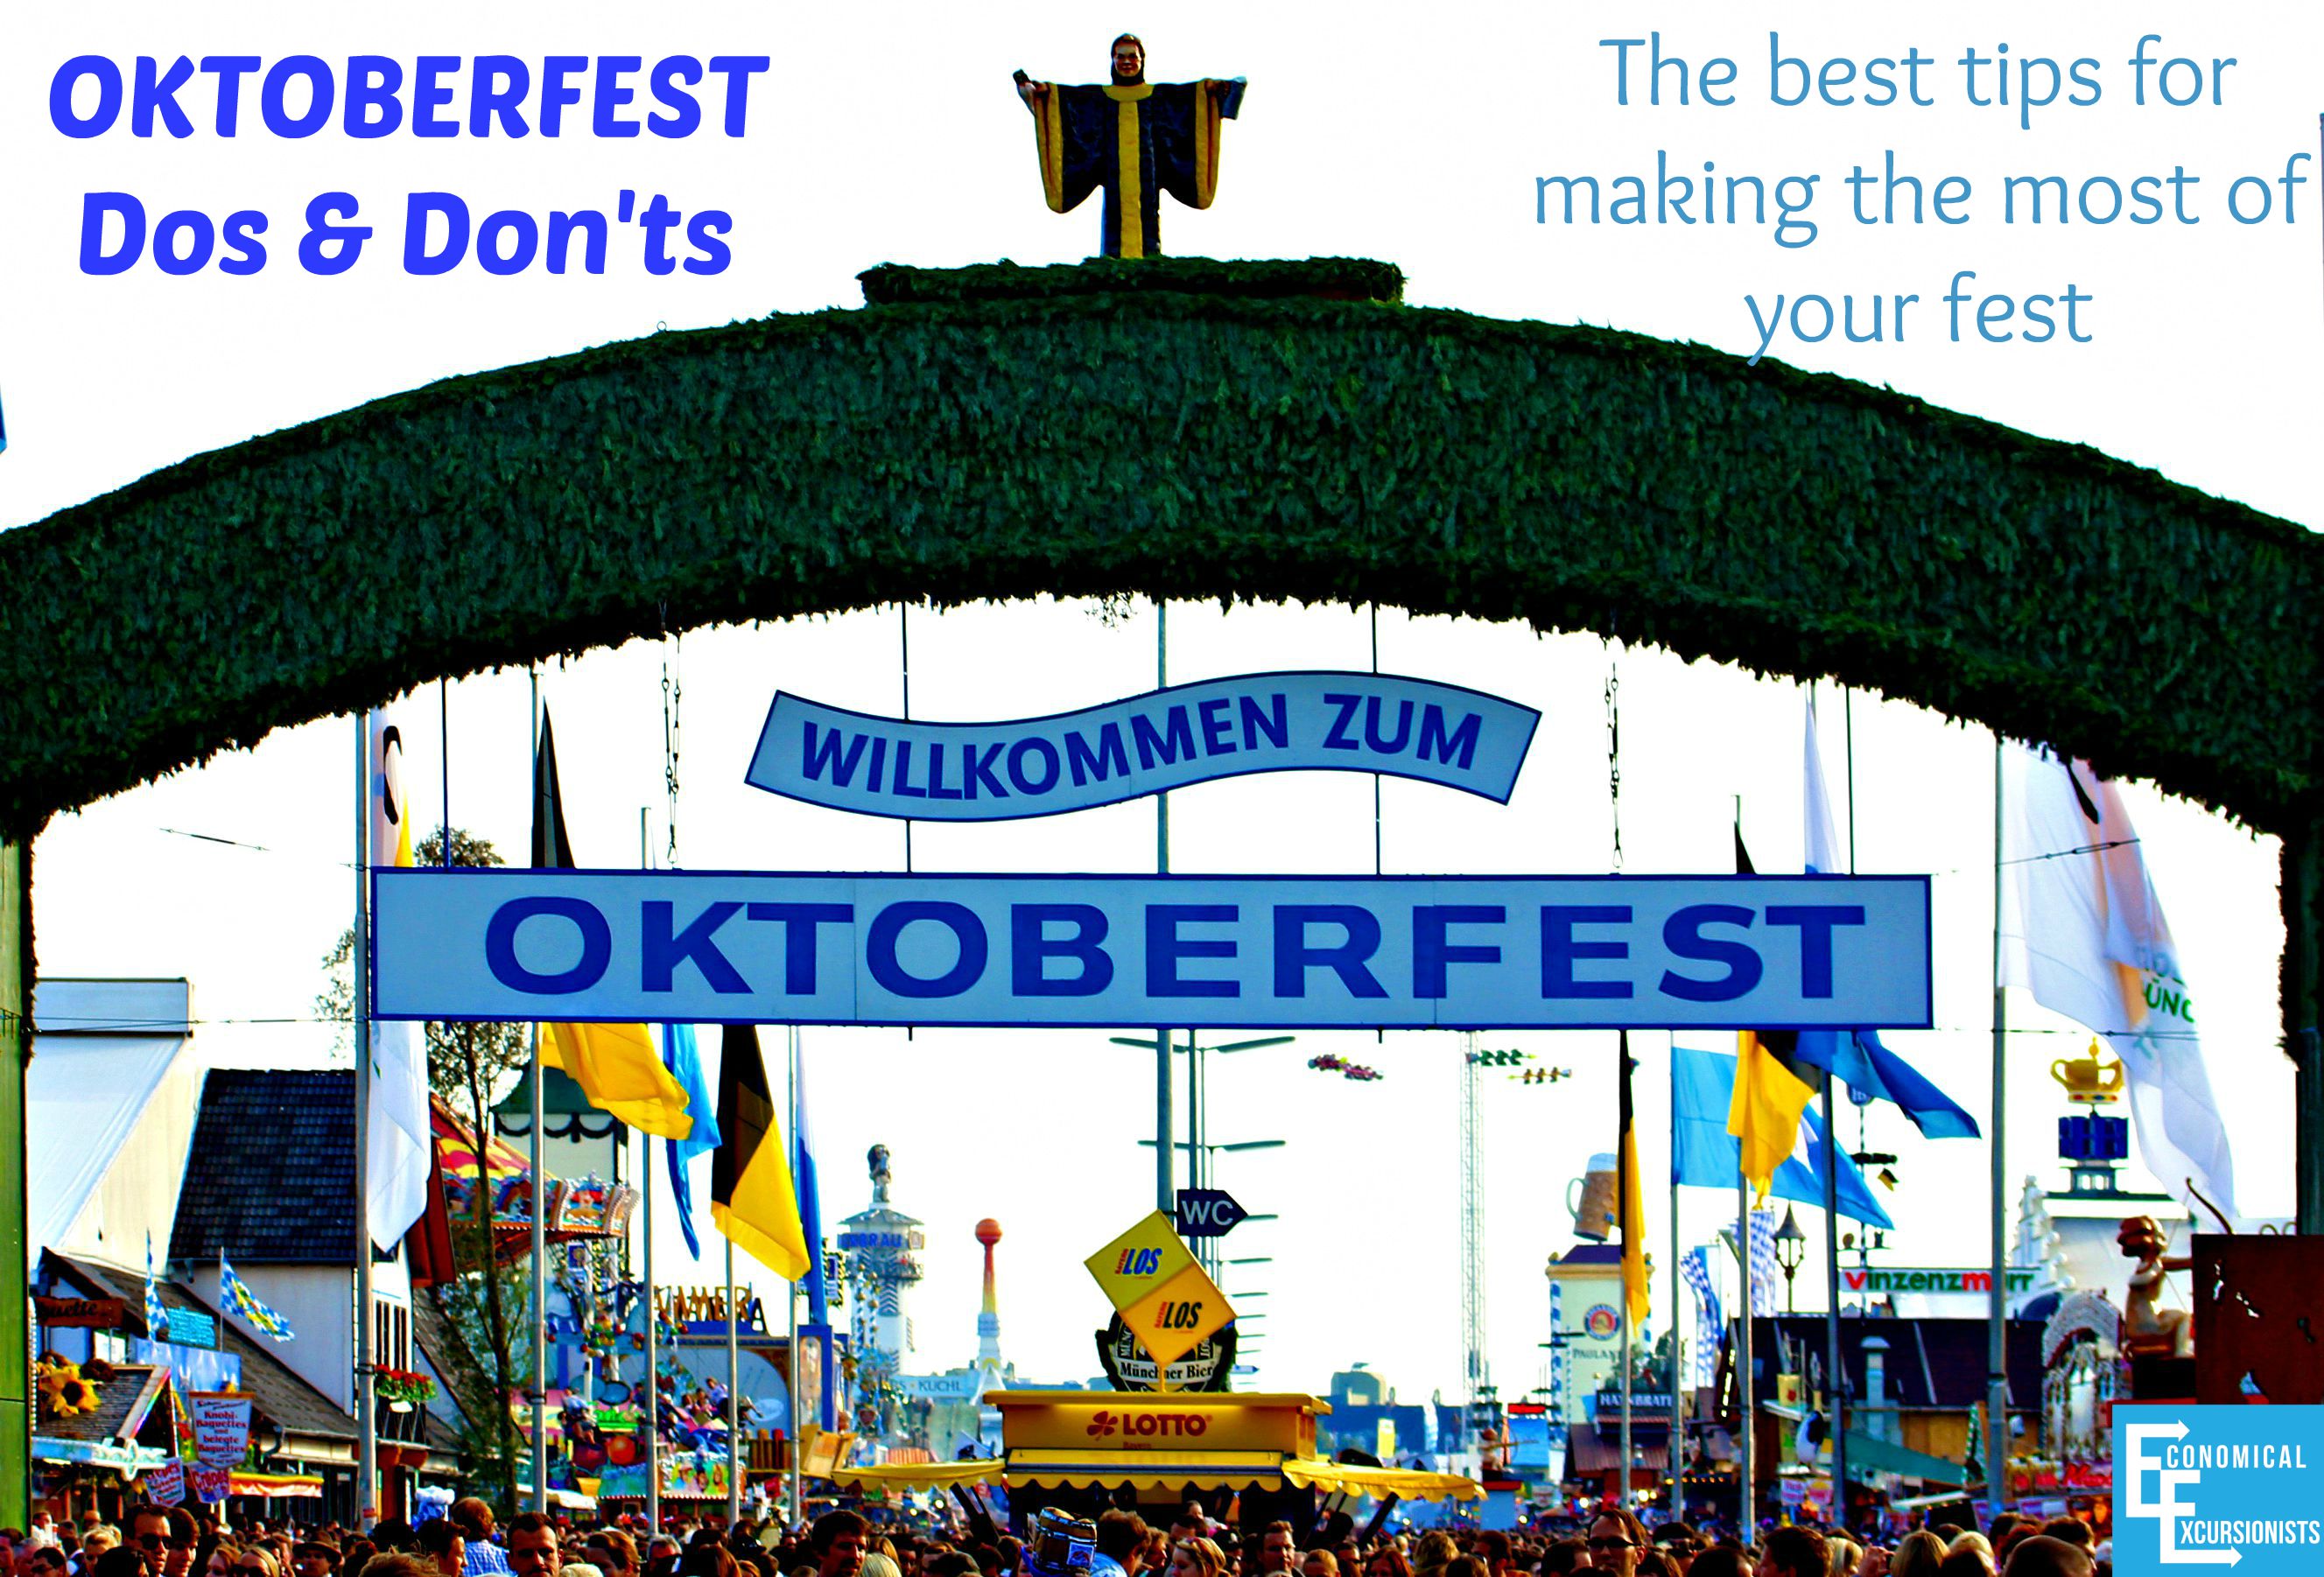 Oktoberfest Tips Dos and Dont's